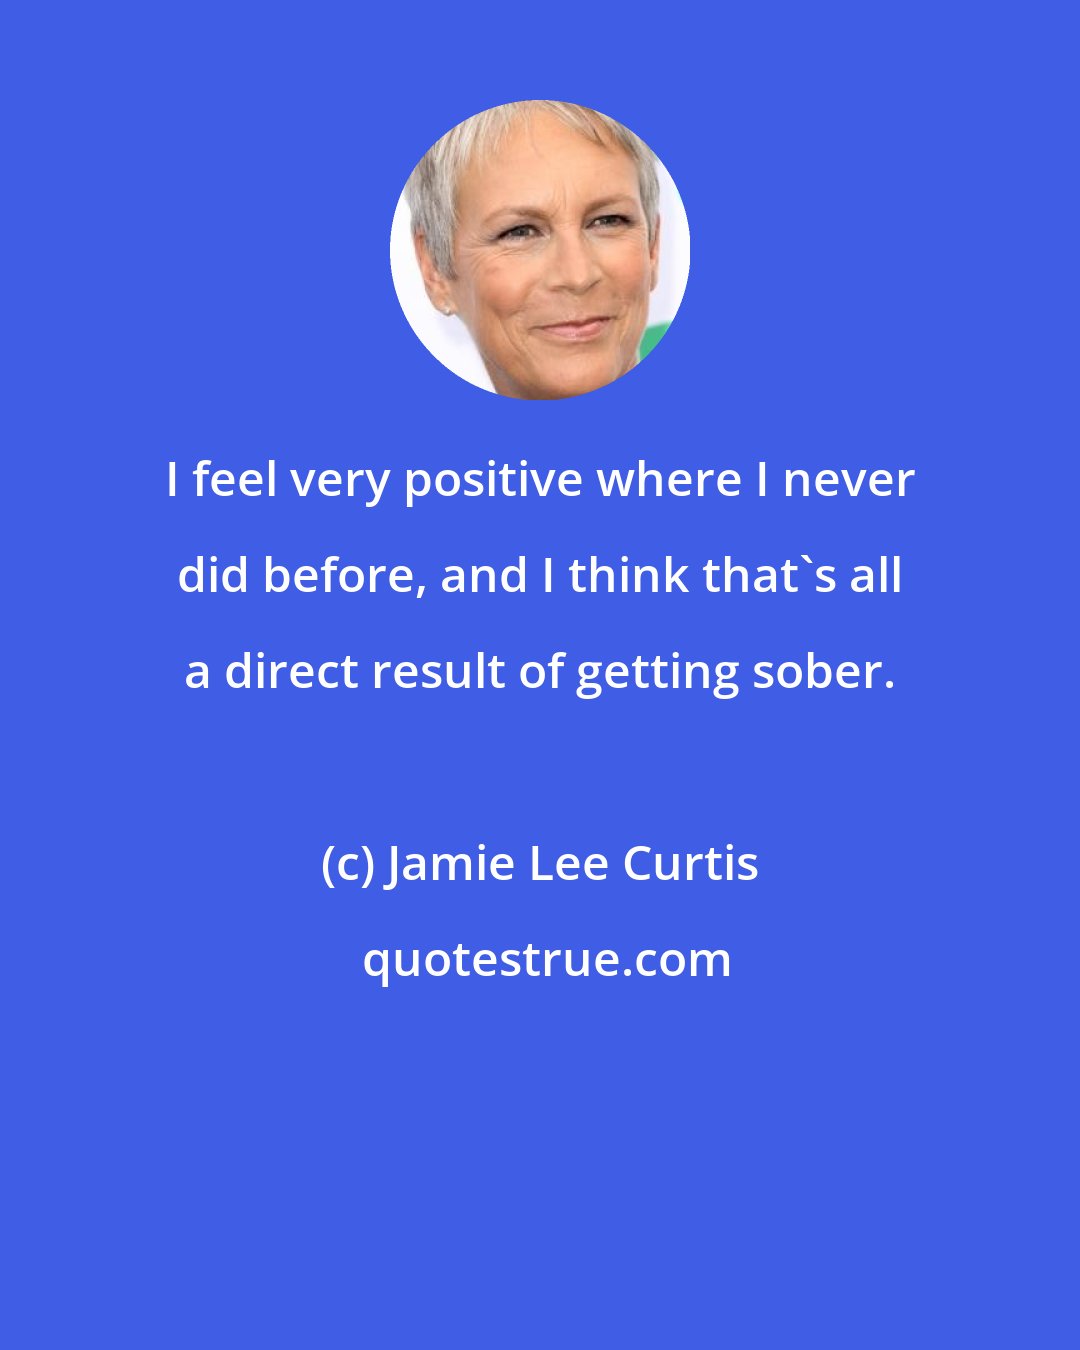 Jamie Lee Curtis: I feel very positive where I never did before, and I think that's all a direct result of getting sober.